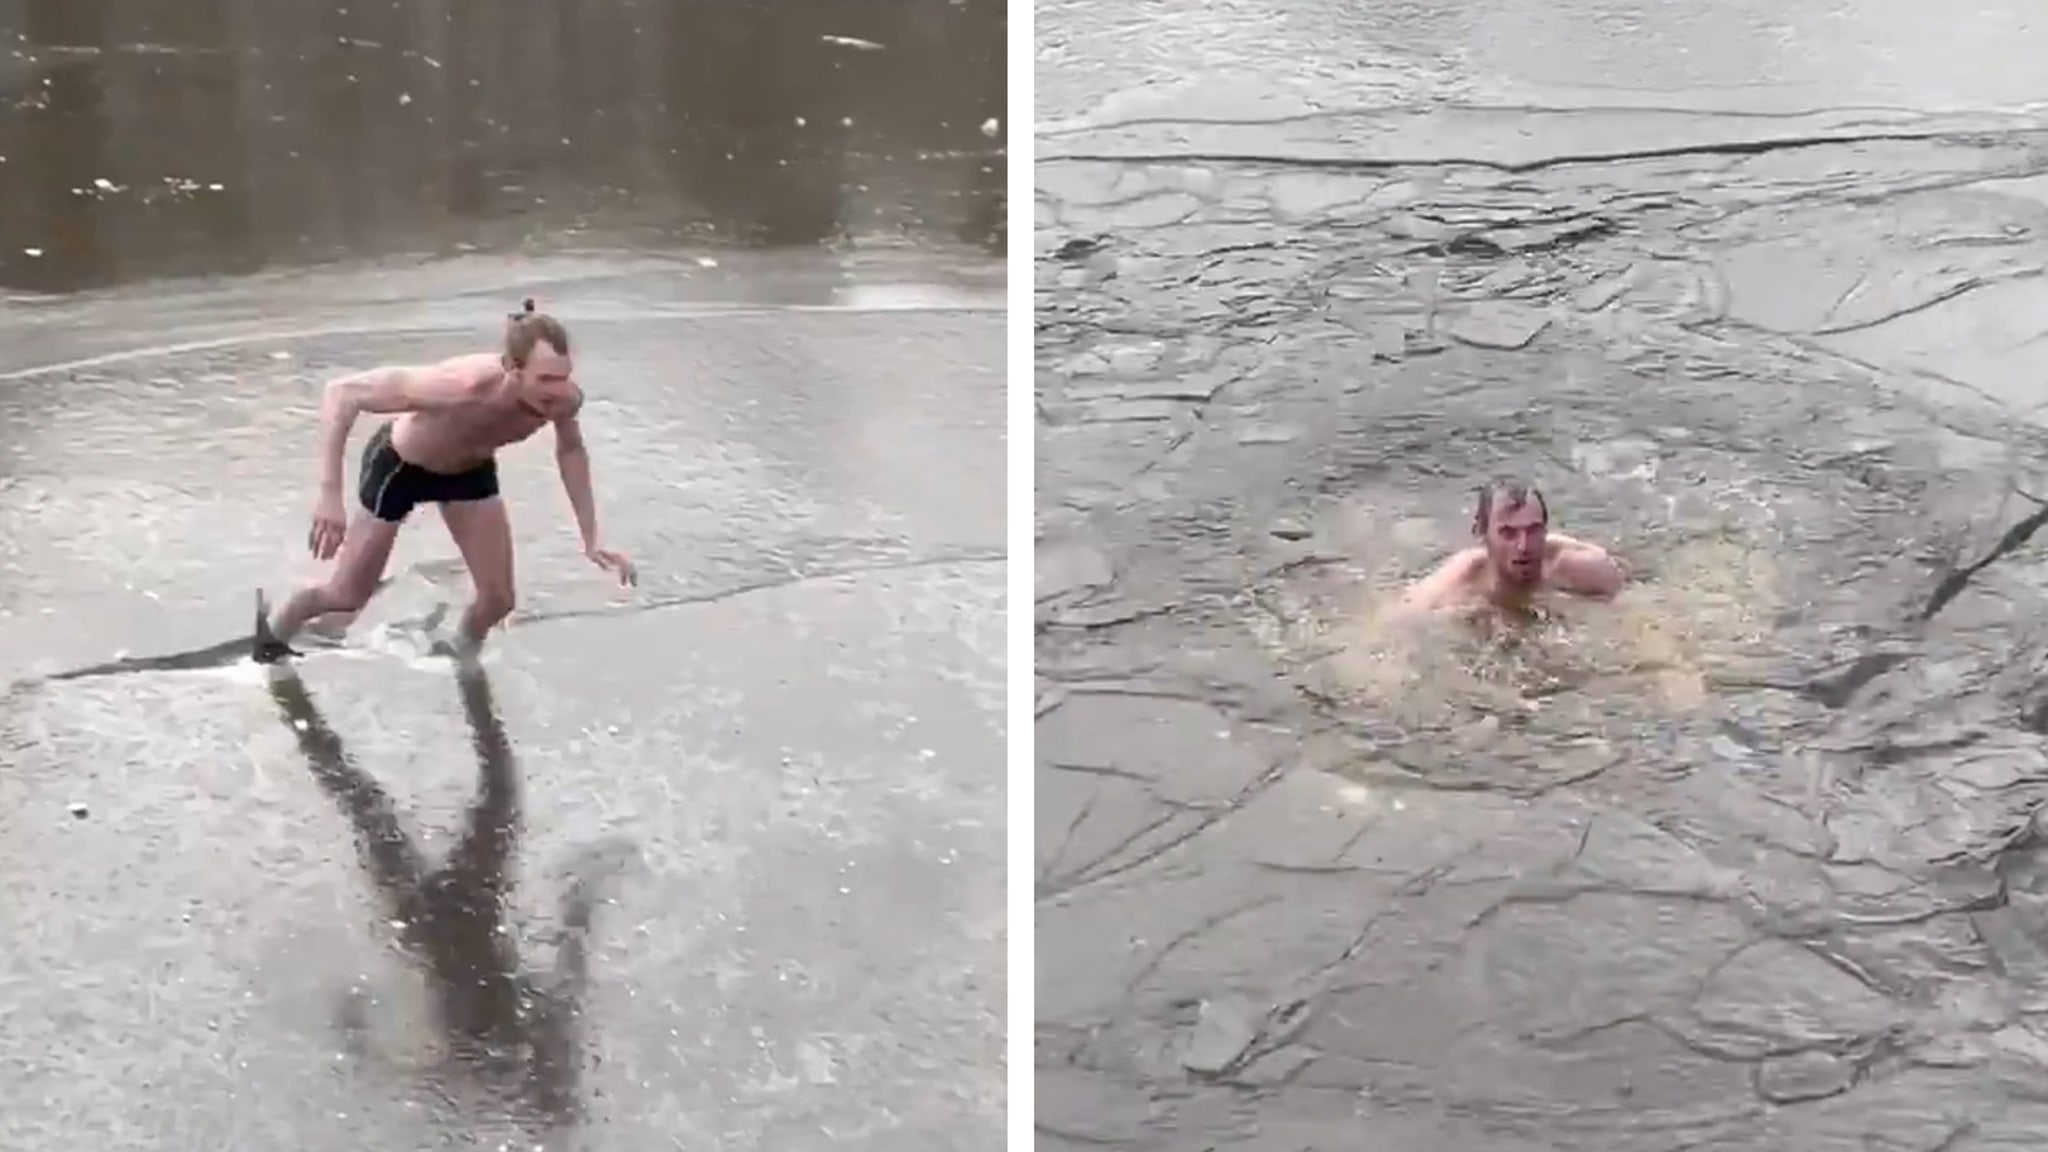 The ice skater’s epic failure on Amsterdam’s frozen canals goes viral